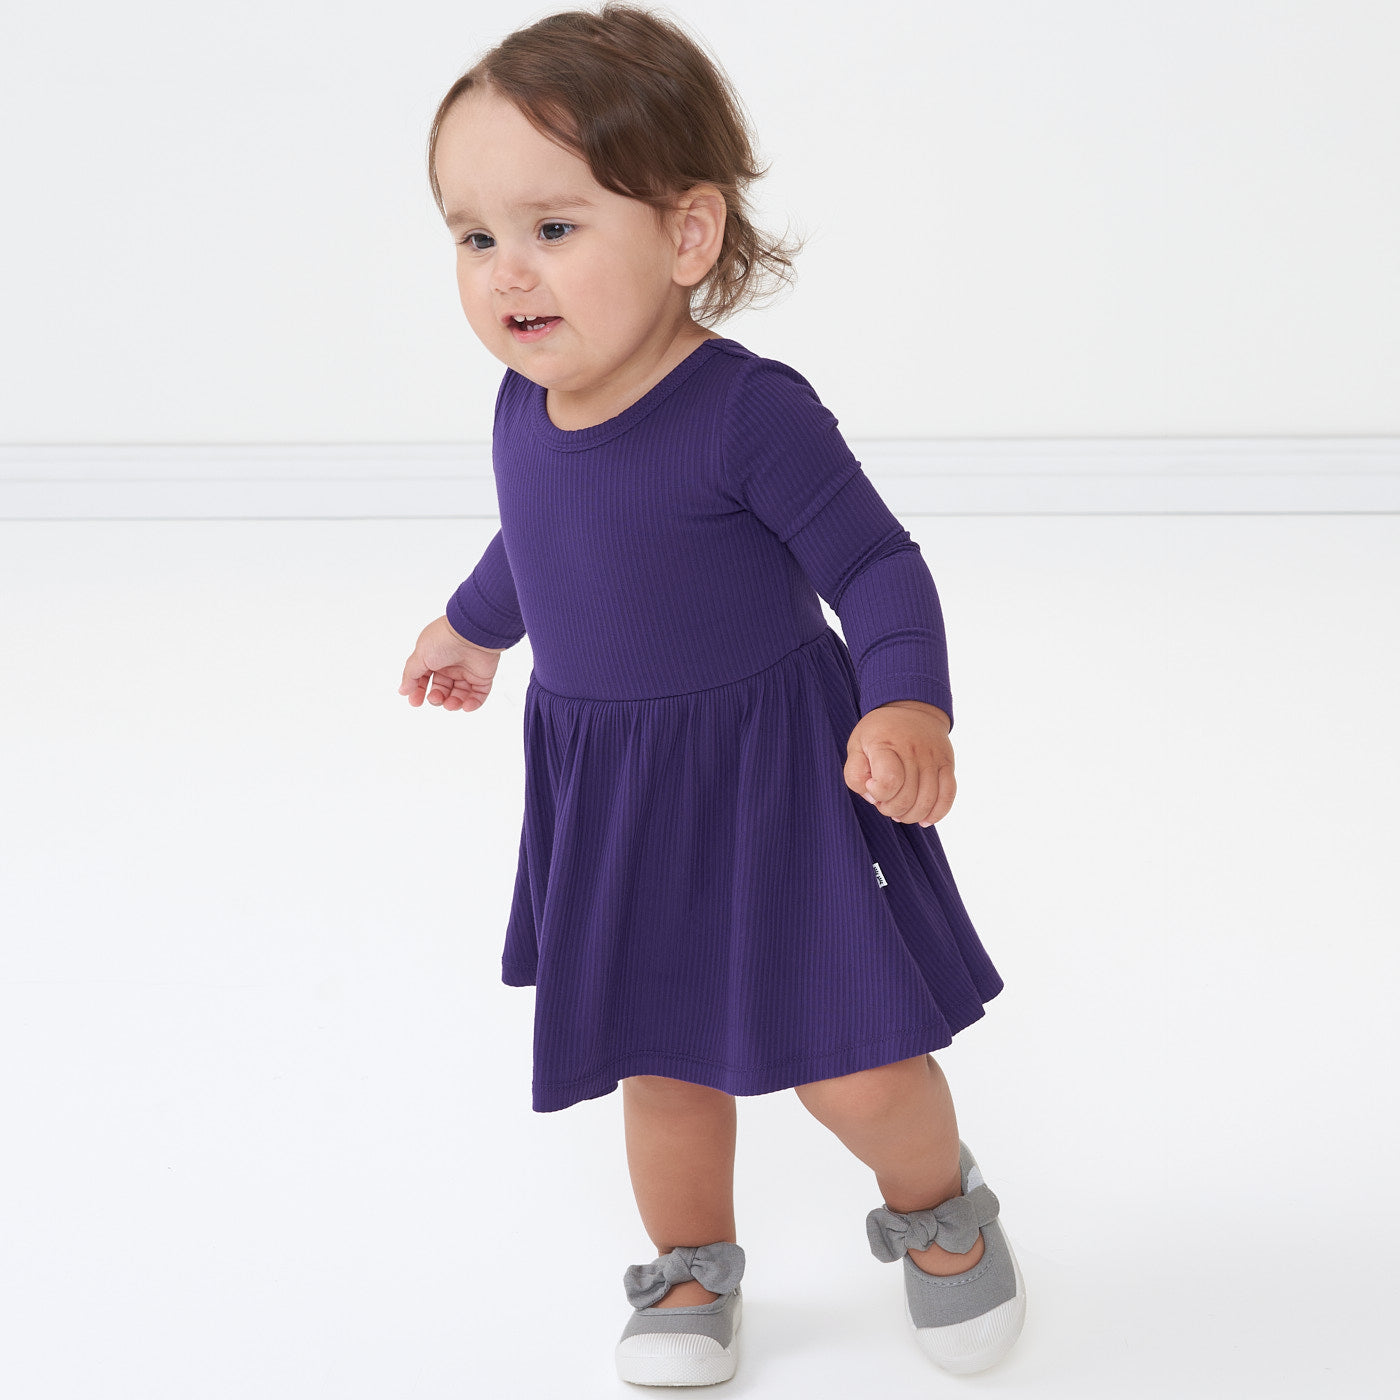 Alternate image of a child wearing a Deep Amethyst ribbed twirl dress with bodysuit